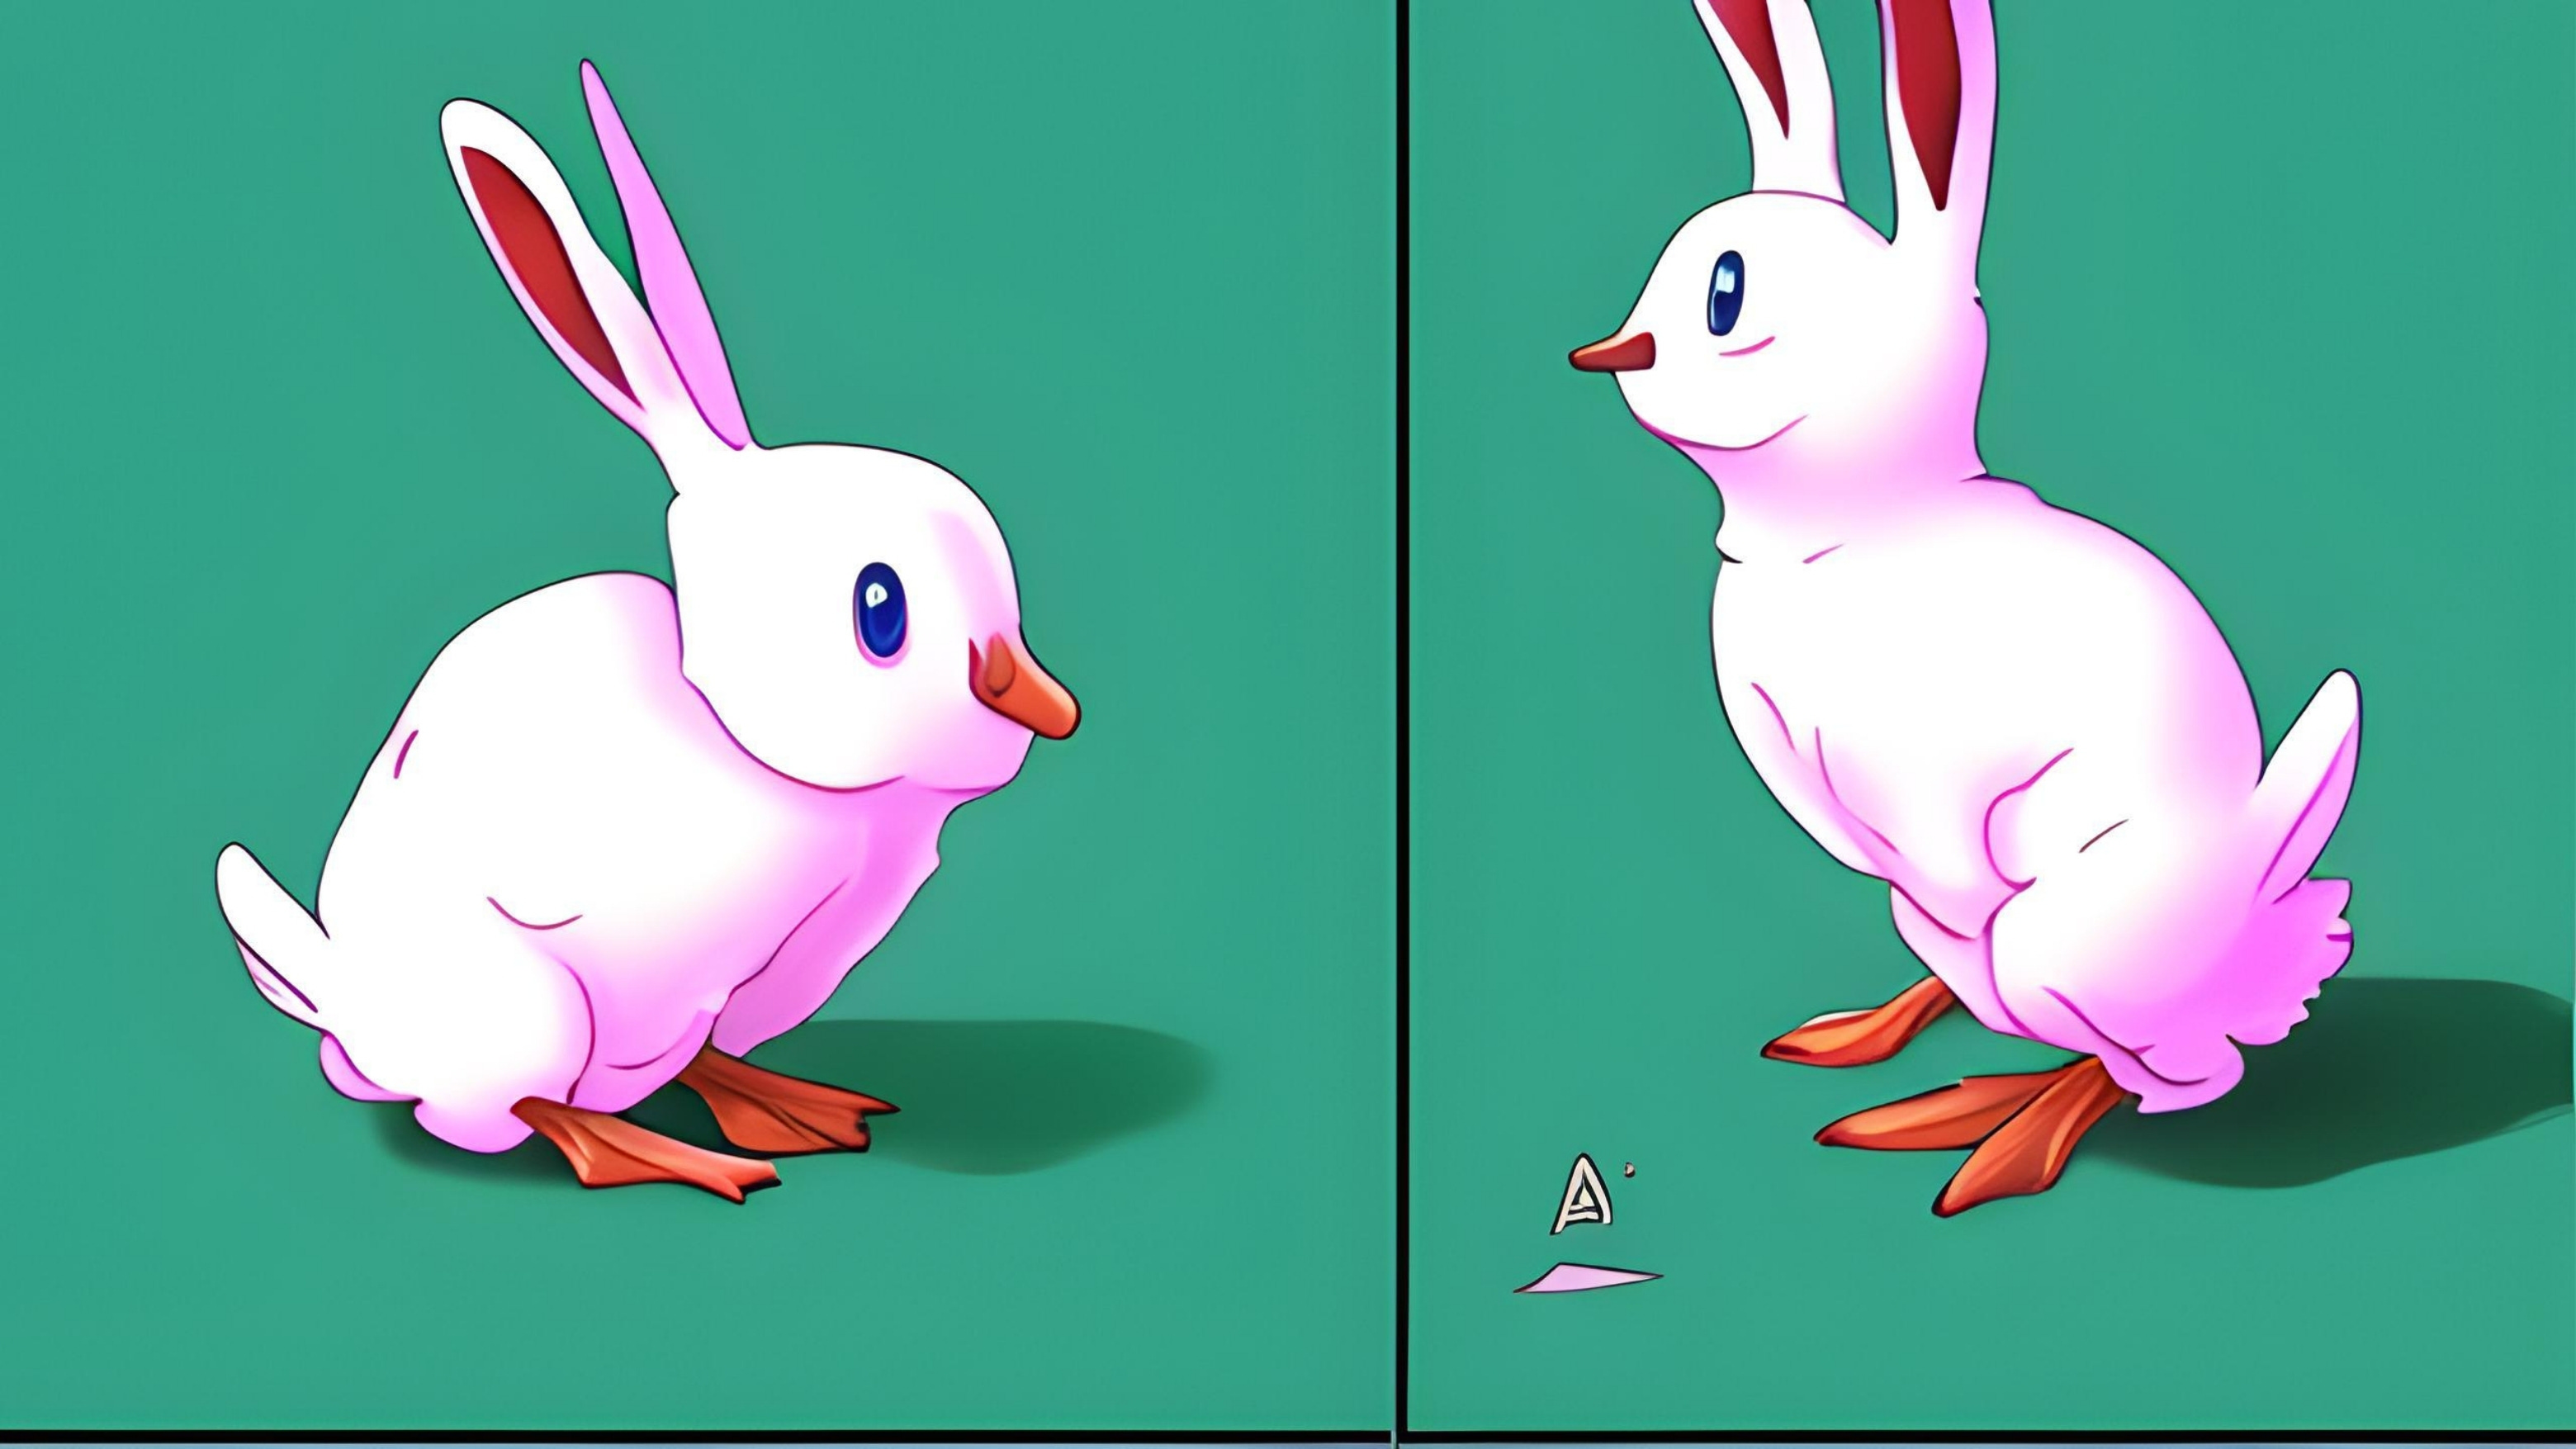 The image shows two AI-generated cartoons of a half-rabbit, half-duck character.